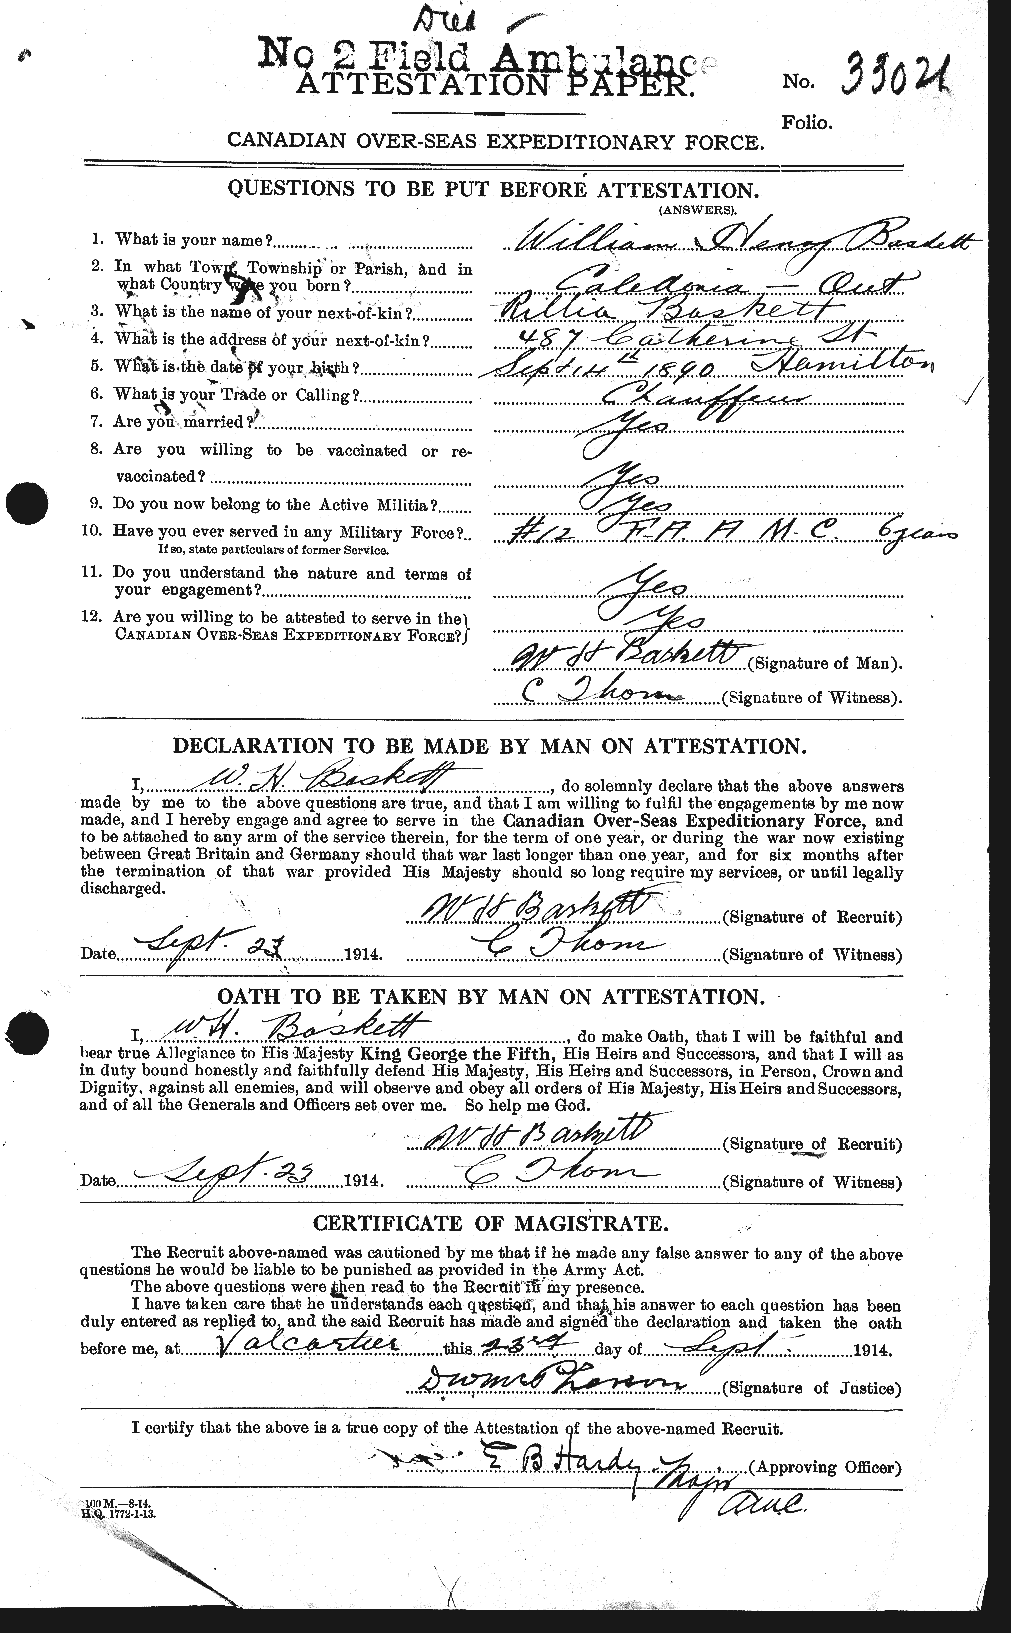 Personnel Records of the First World War - CEF 221174a